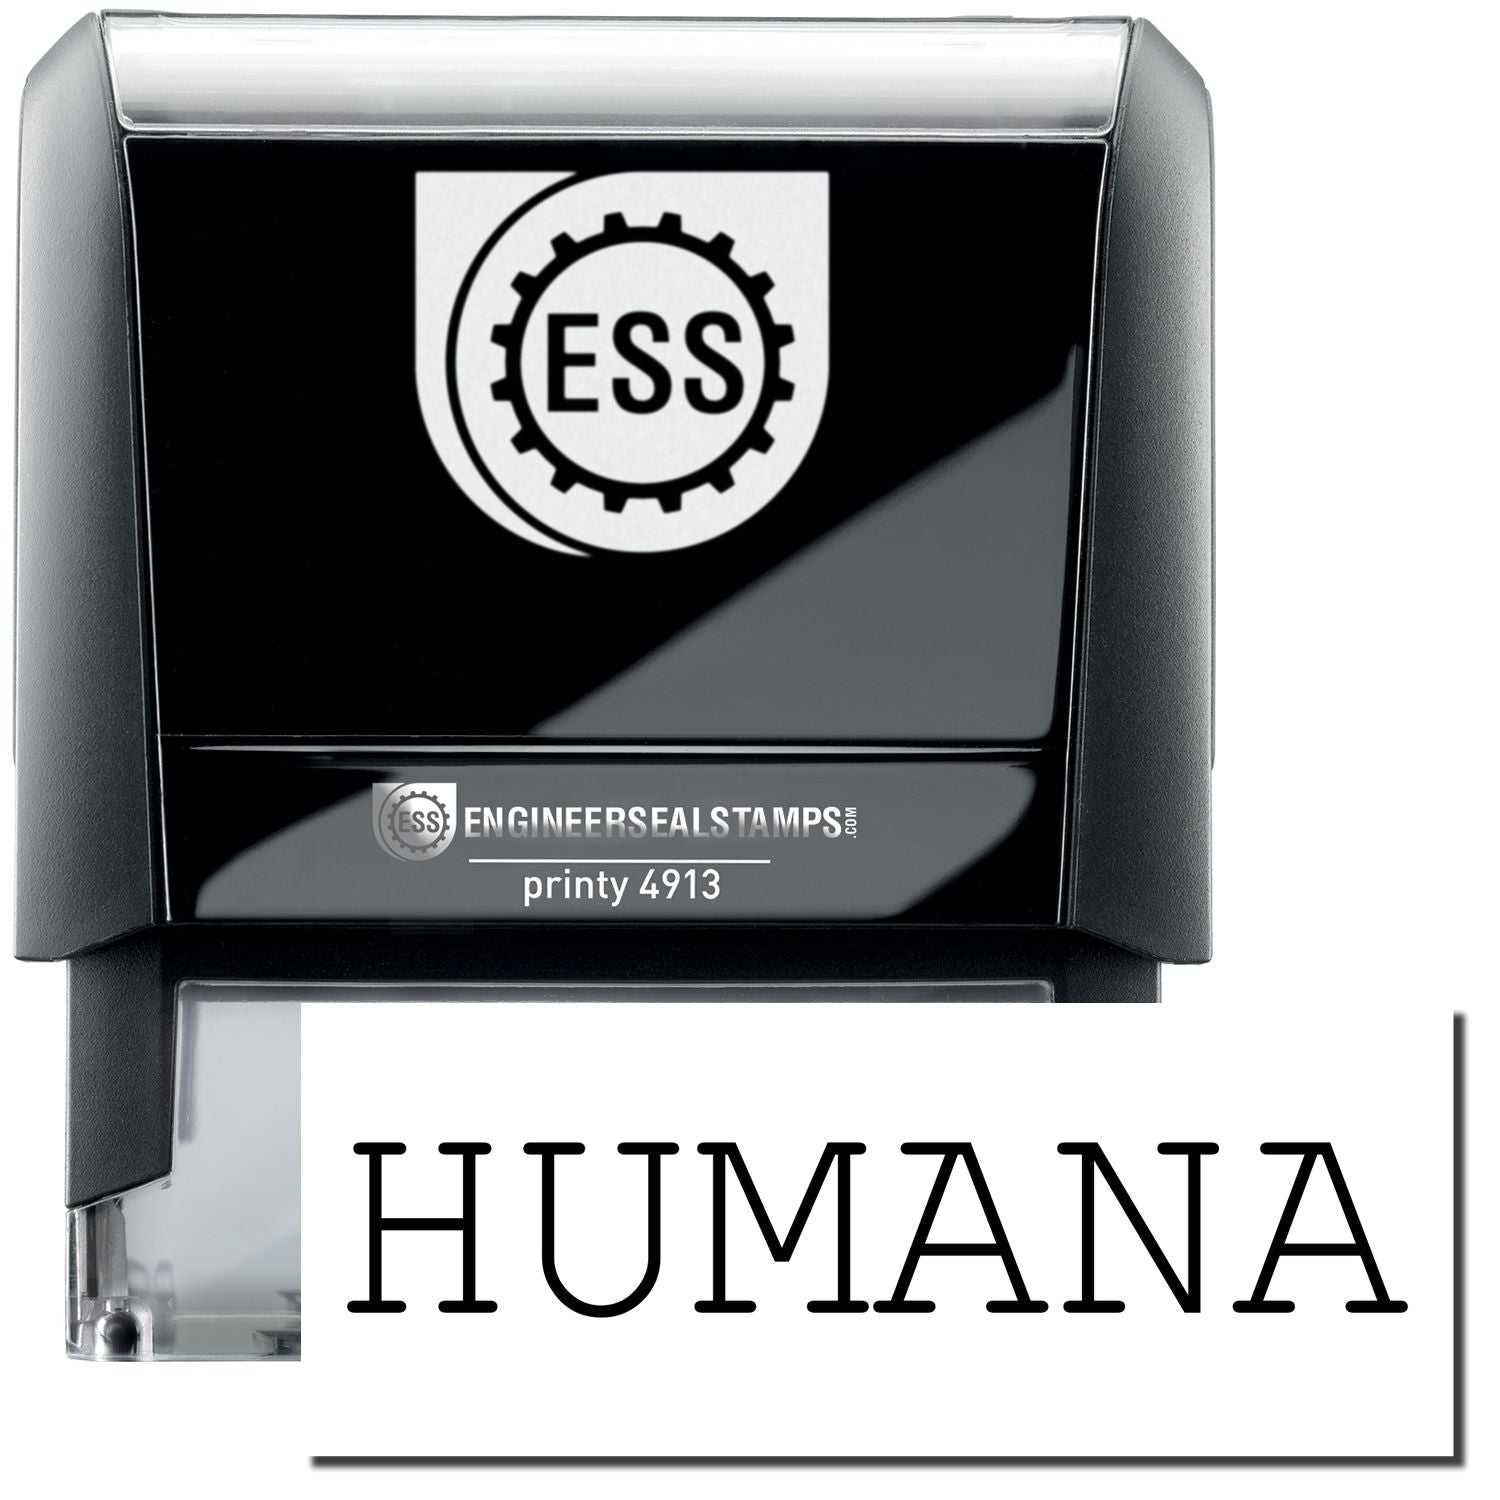 A self-inking stamp with a stamped image showing how the text "HUMANA" in capital letters is displayed by it.